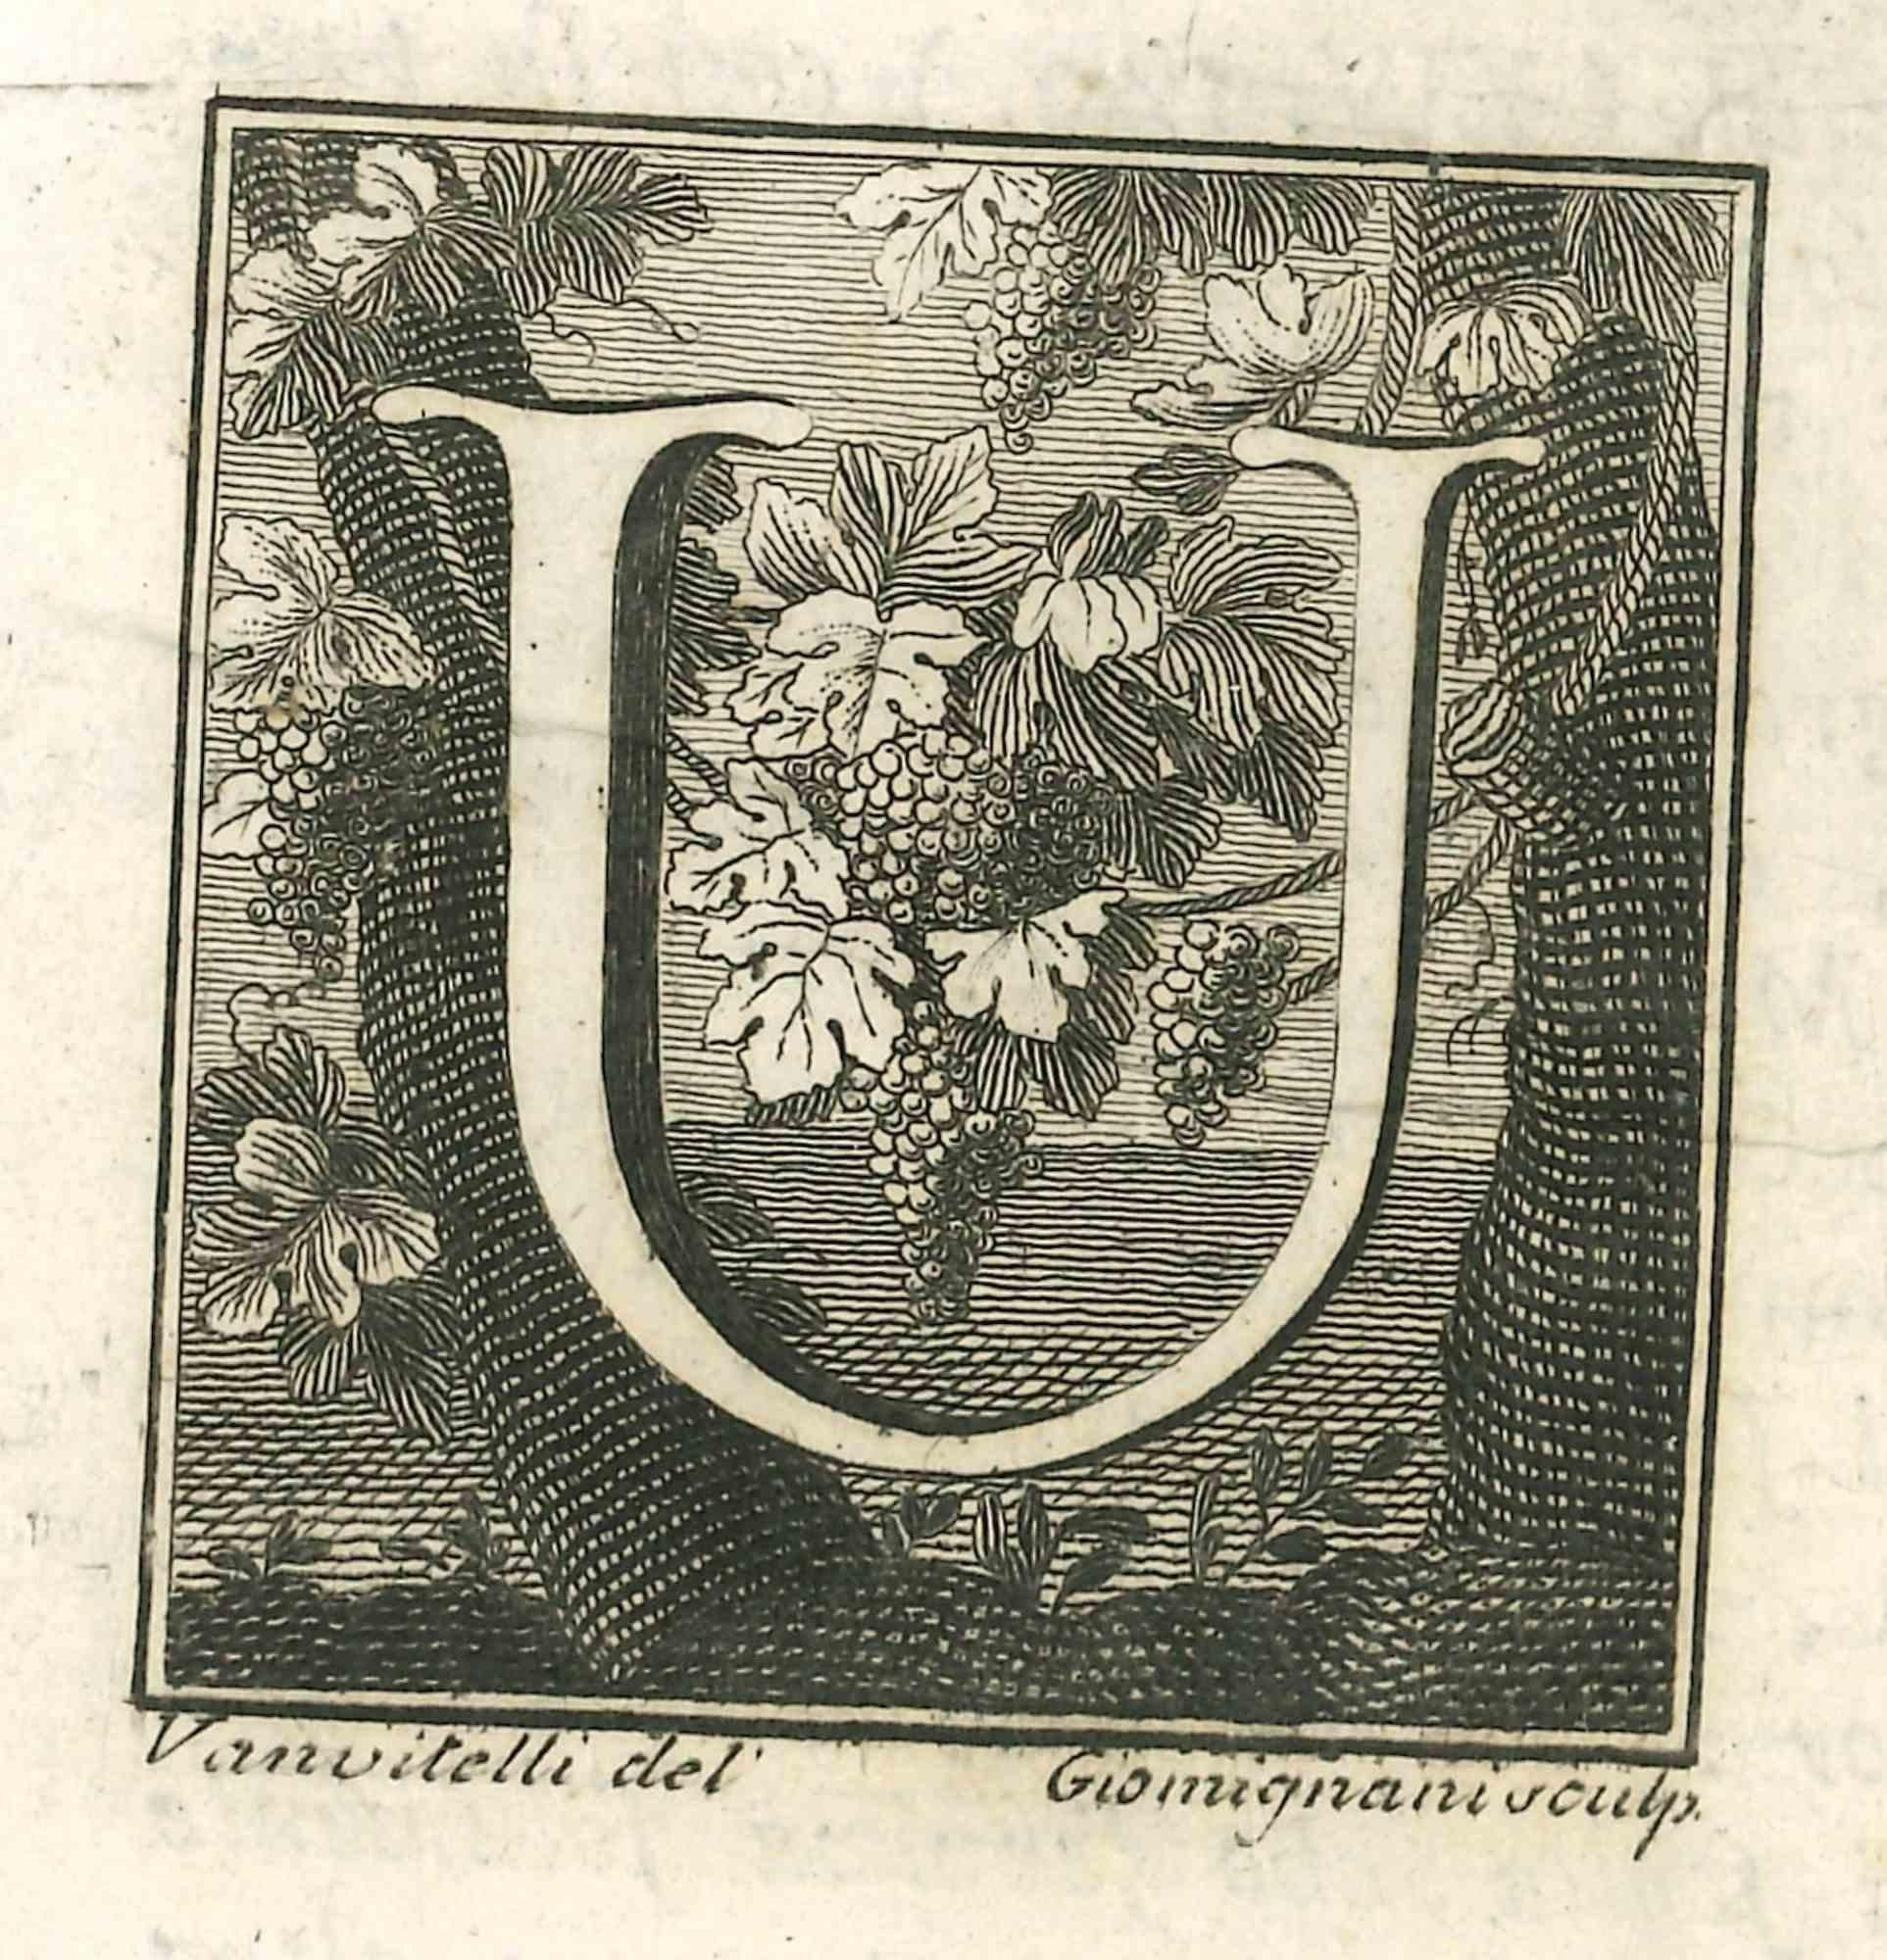 Letter A is an etching realized by Luigi Vanvitelli artist of 18th century.

The etching belongs to the print suite “Antiquities of Herculaneum Exposed” (original title: “Le Antichità di Ercolano Esposte”), an eight-volume volume of engravings of